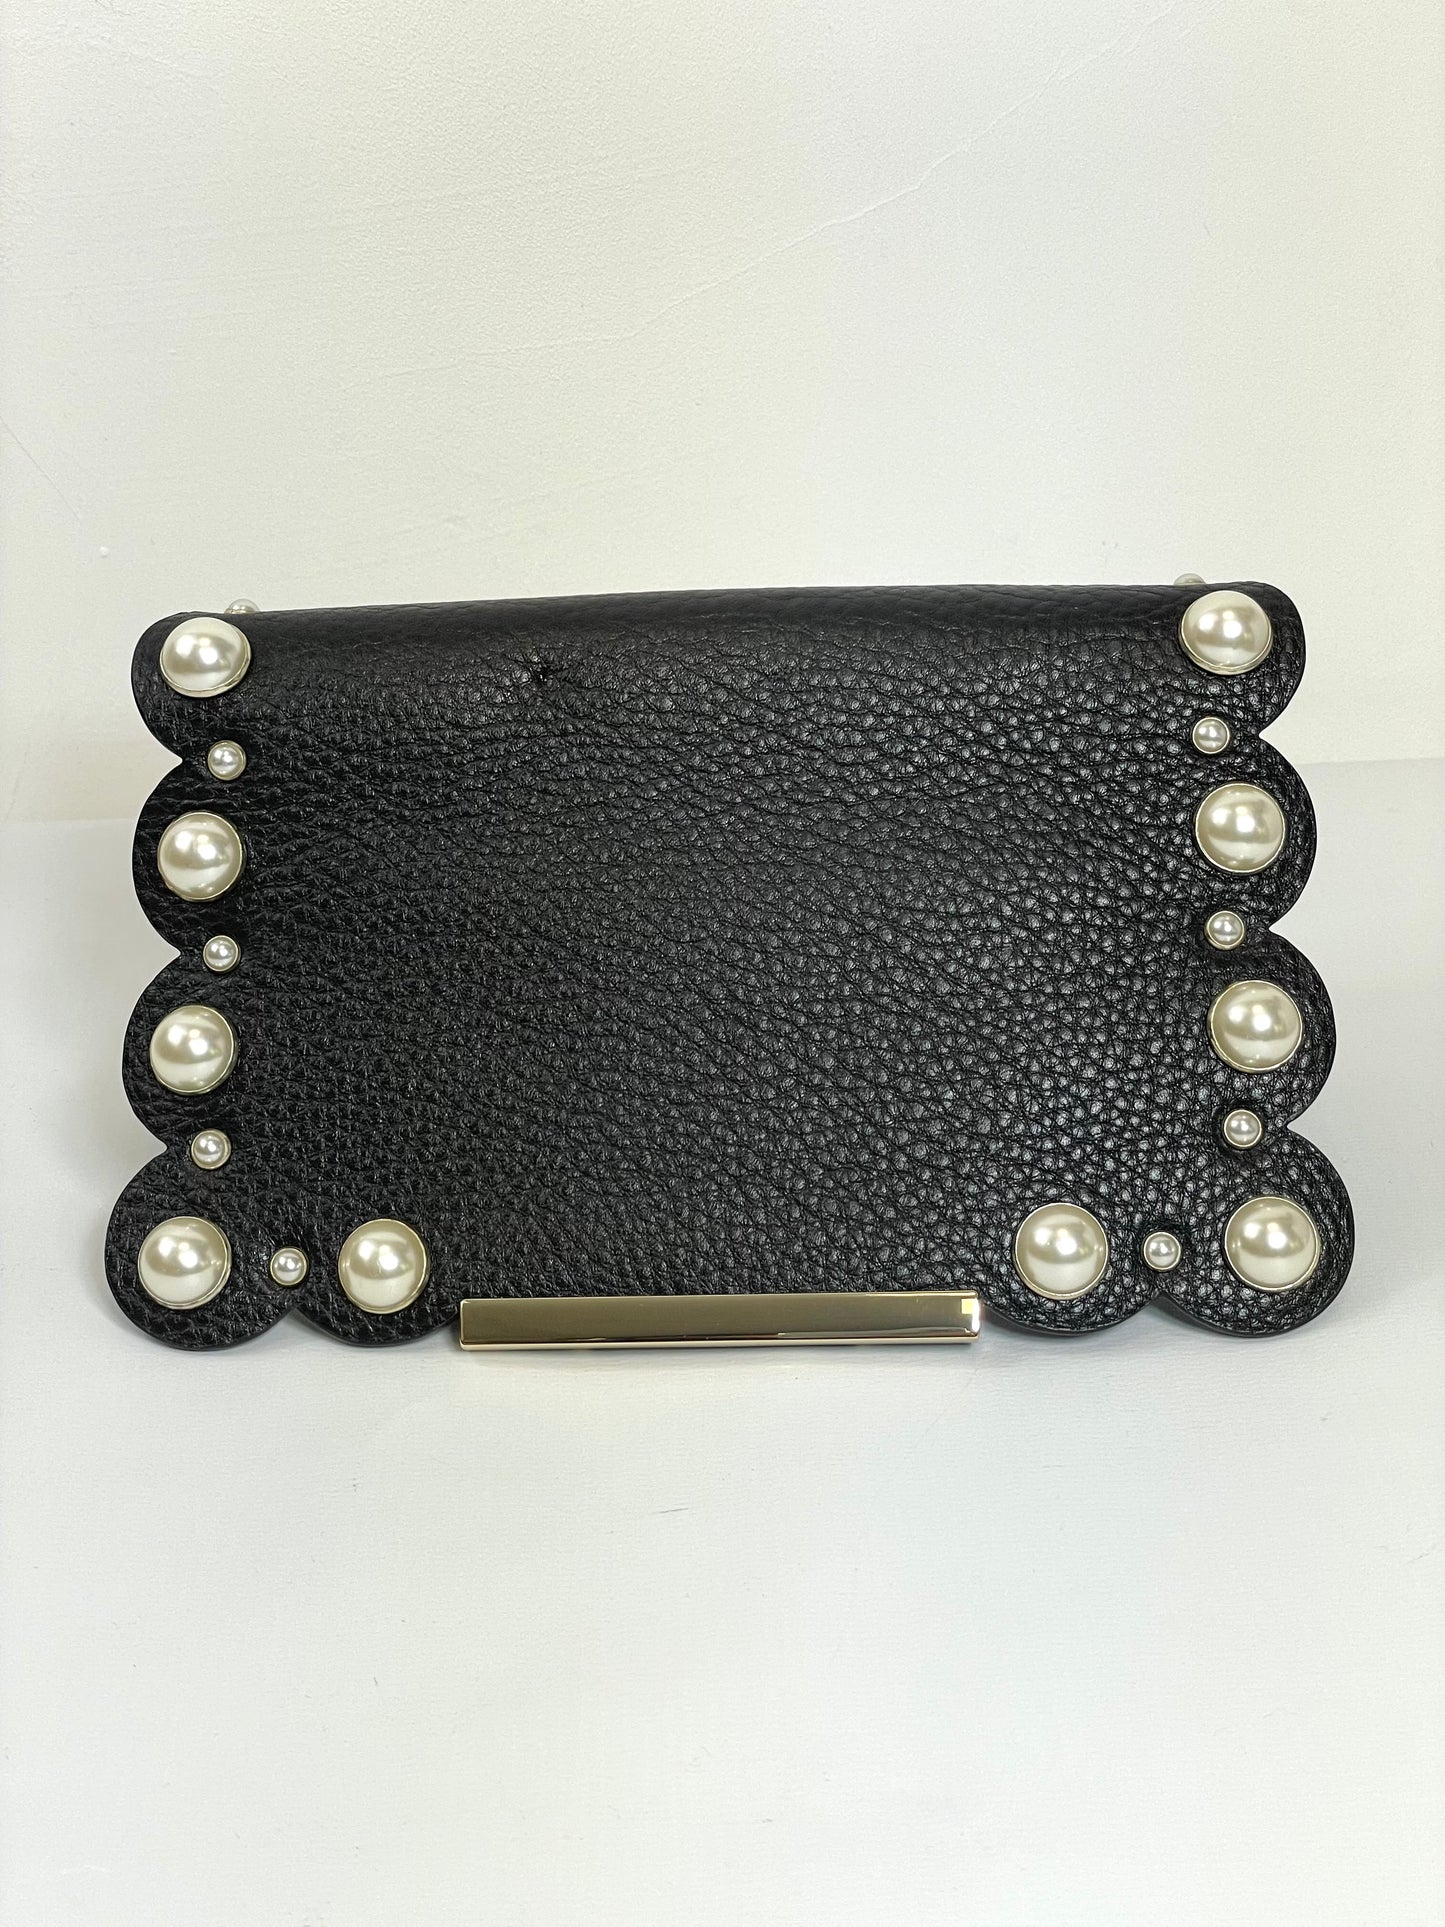 Kate Spade New York Make It Mine Leather Scallop Pearl Bag Flap in Black